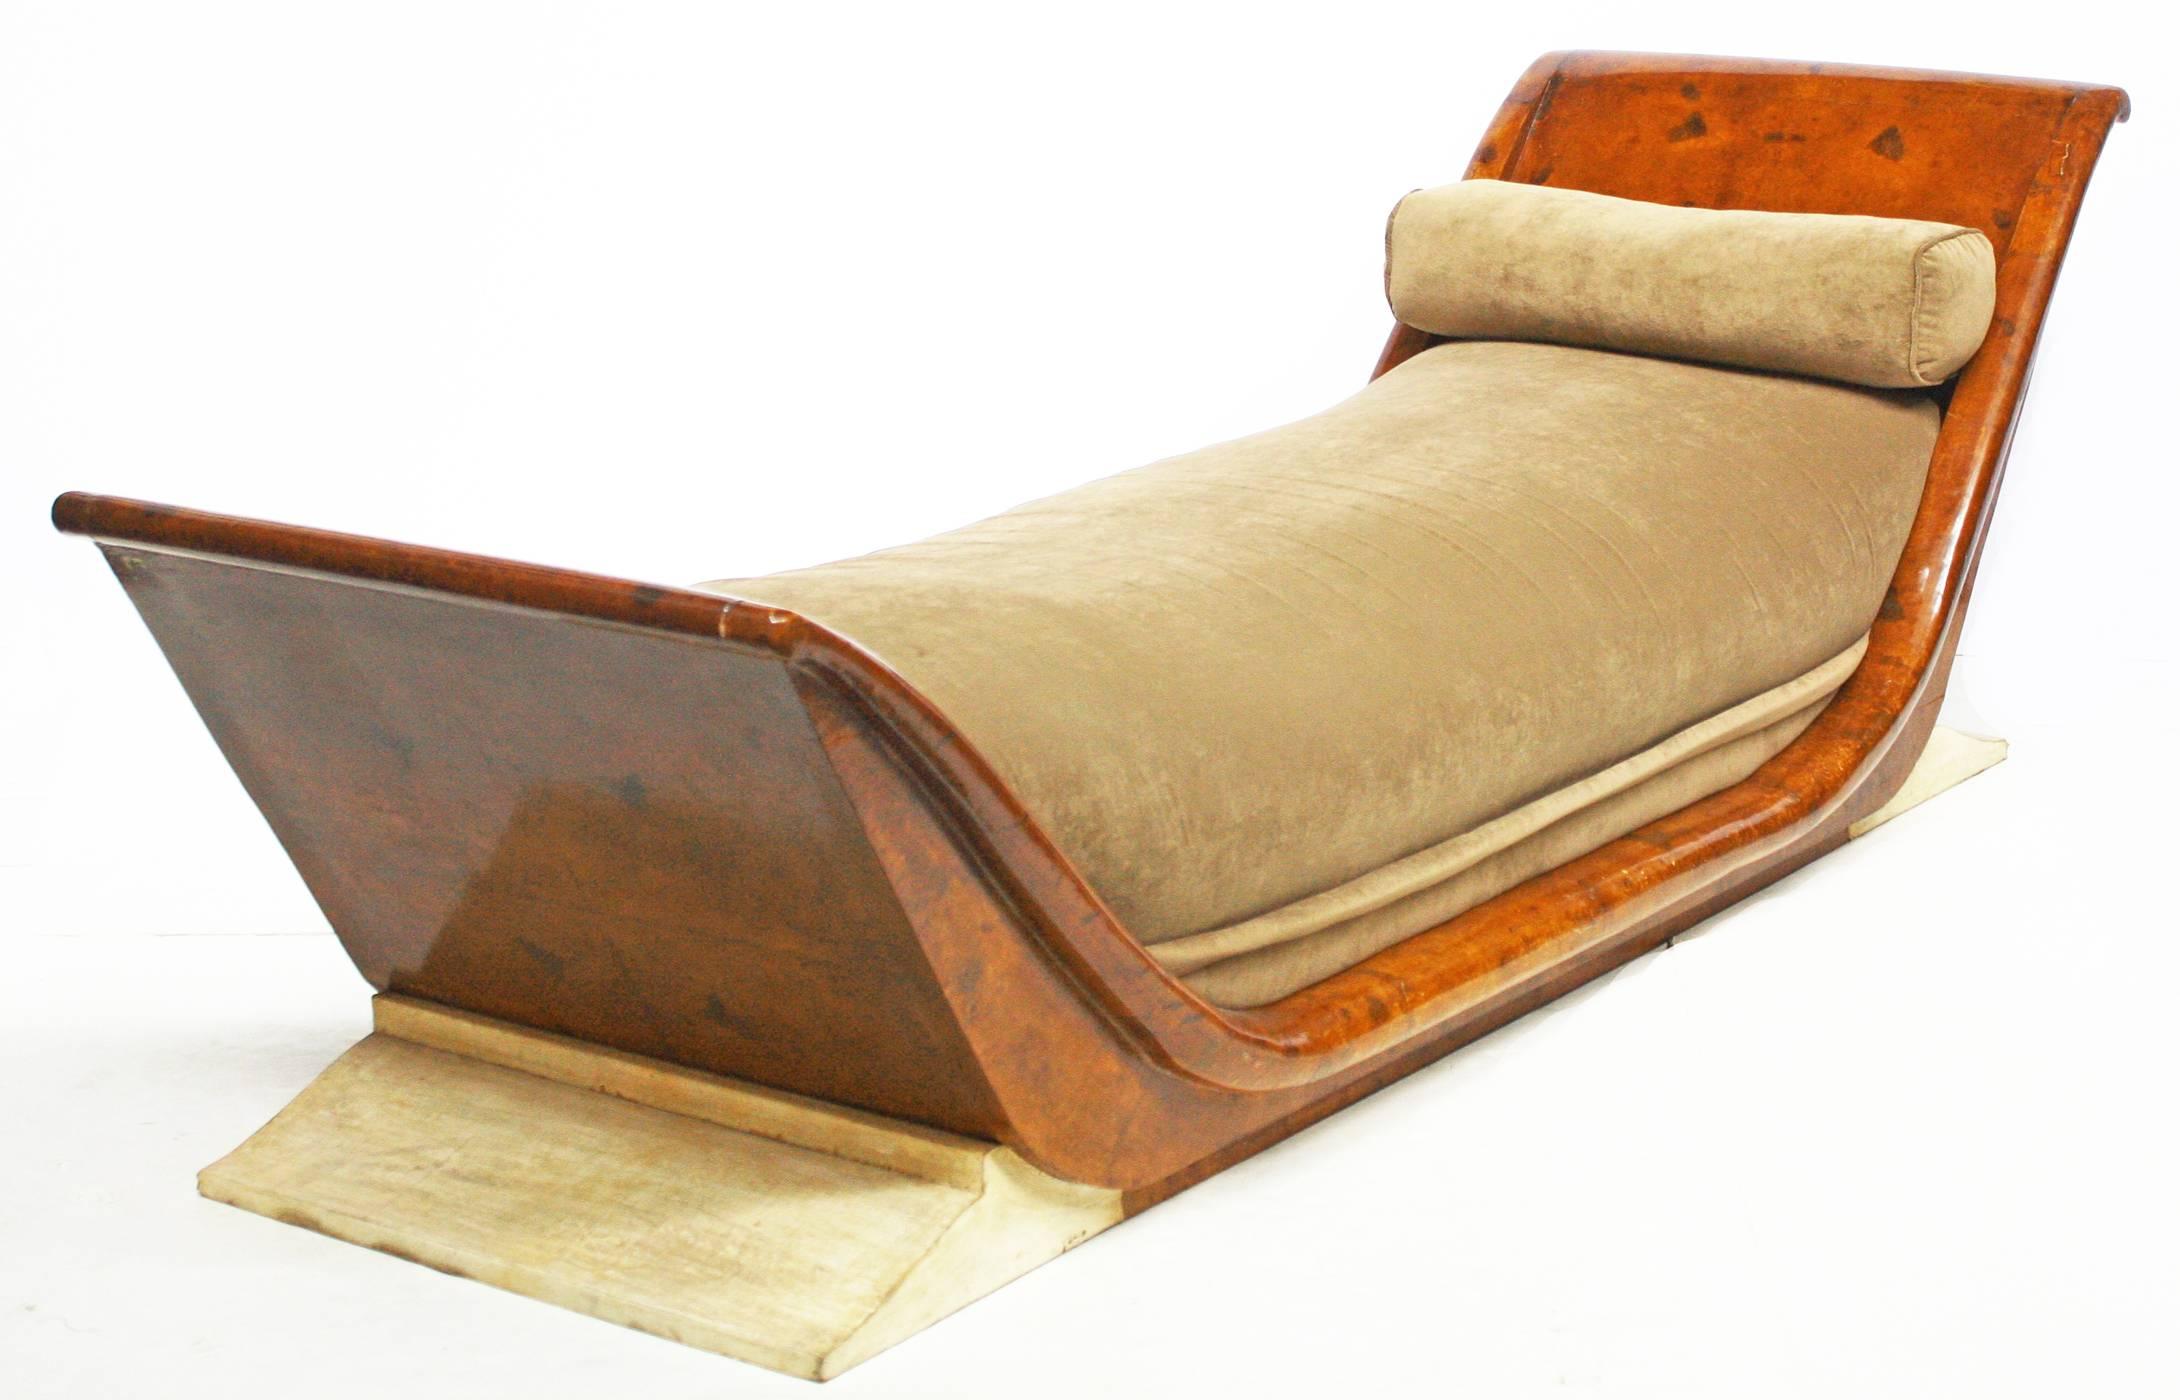 A fine and rare André Arbus (1903-1969) lacquered wood and sharkskin Gondola bed, circa1930, with lacquer work by Jean Dunand (1877-1942), upholstered in taupe ultrasuede

platform base removed.

Head of the bed is 31